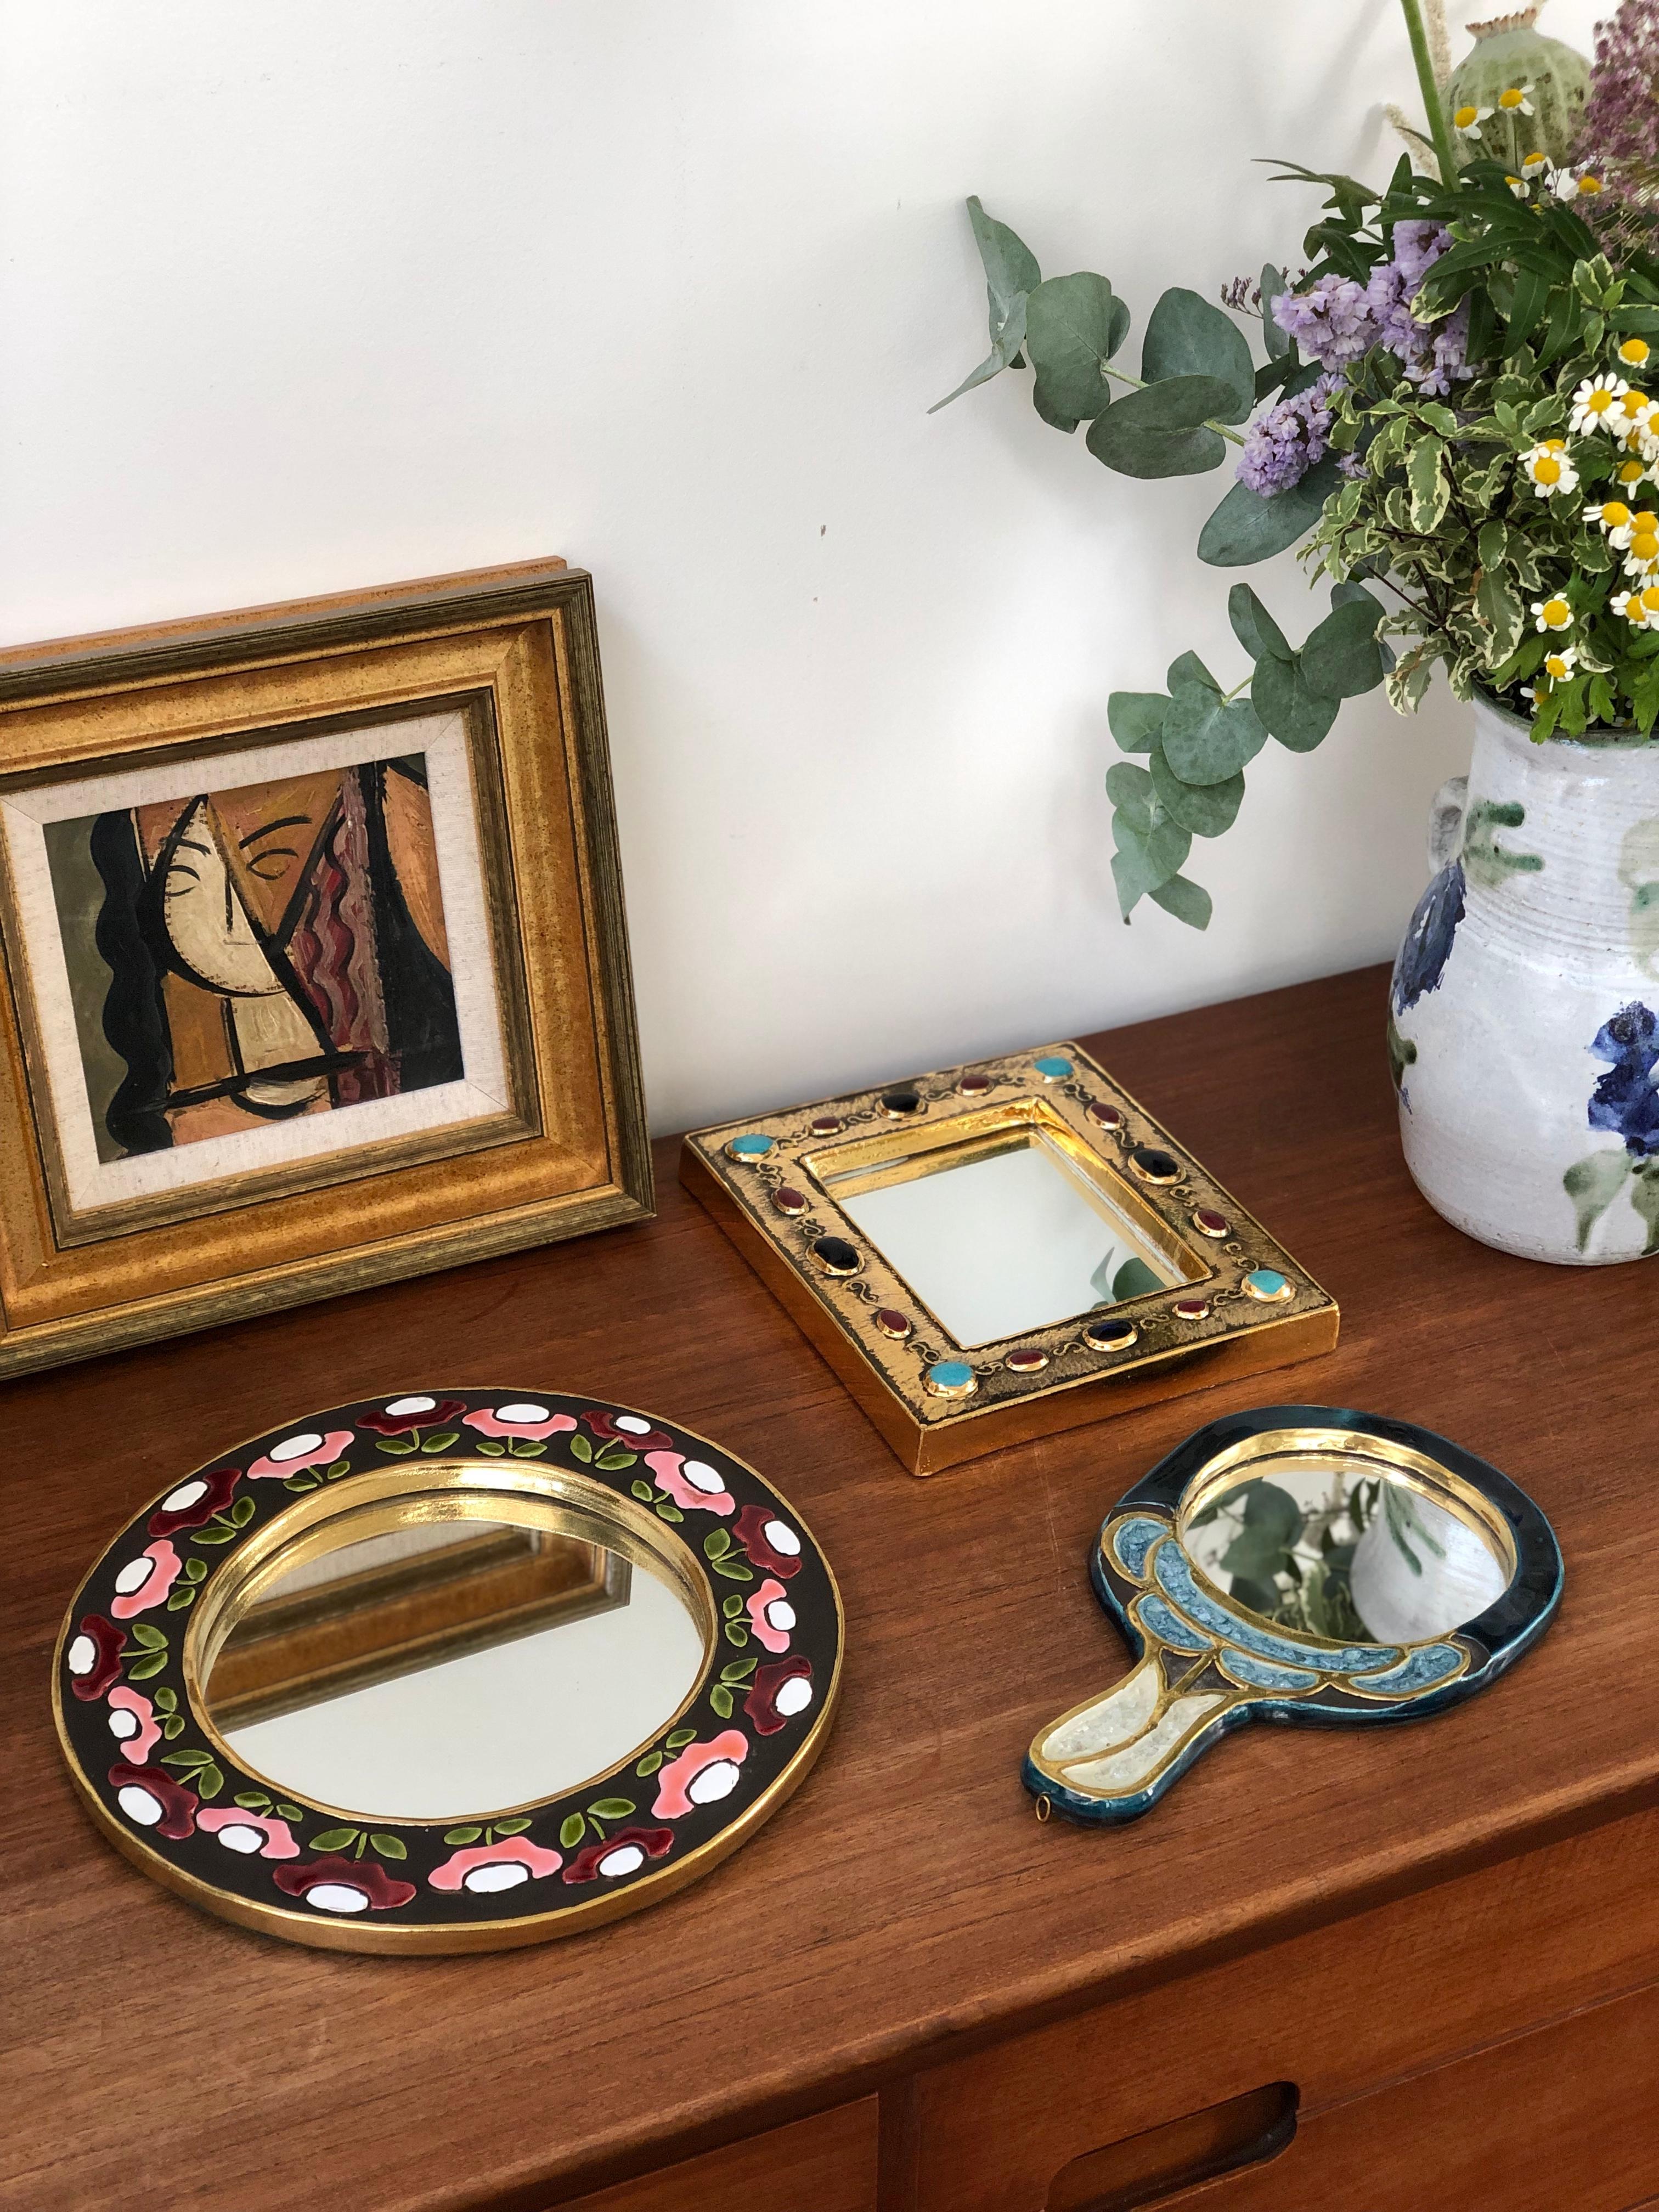 Ceramic wall mirror with flower motif (circa 1960s), by Mithé Espelt. A porthole-shaped decorative wall mirror delights the eye. The inner and outer frames are in a stunning gold craquelure. The enamelled flowers are superimposed over a chocolate